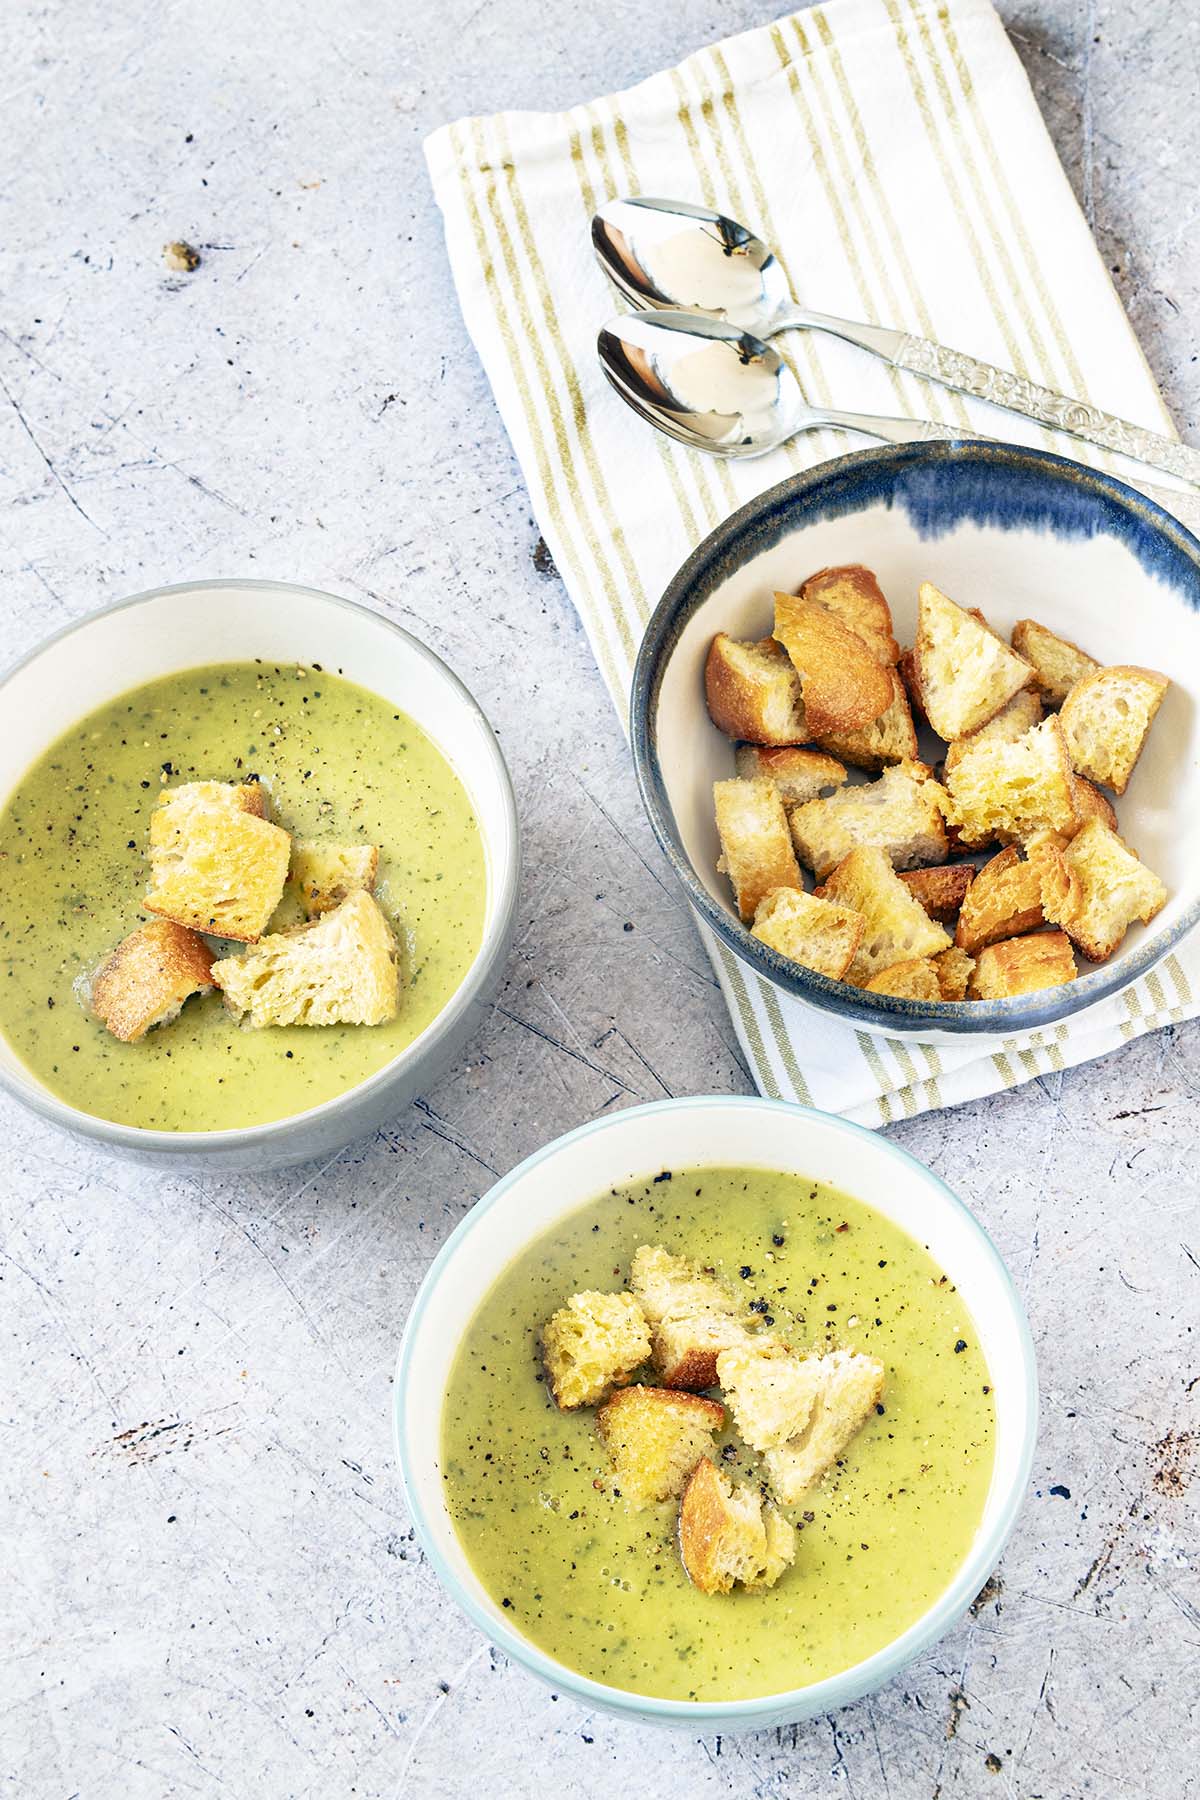 Potato and courgette (zucchini) soup in bowl with croutons